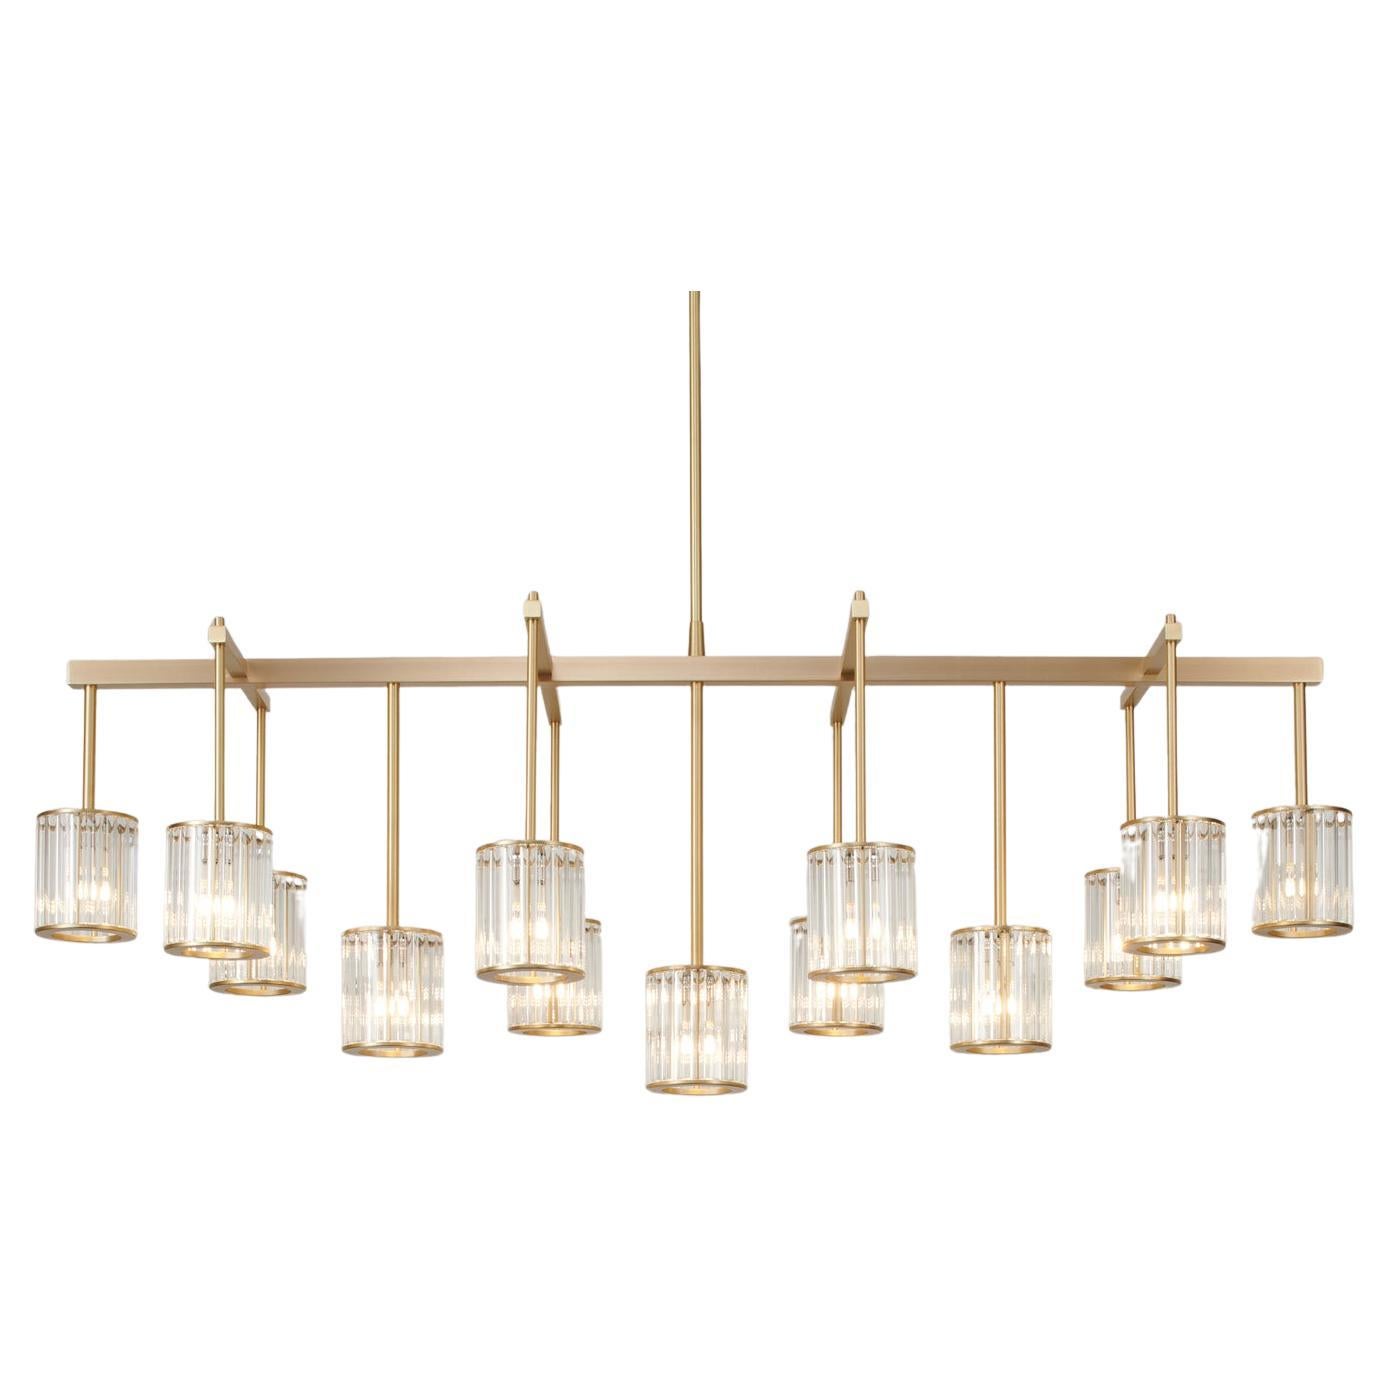 Flute Beam Chandelier with 13 Arms in Brushed Brass and Clear Glass Diffusers For Sale